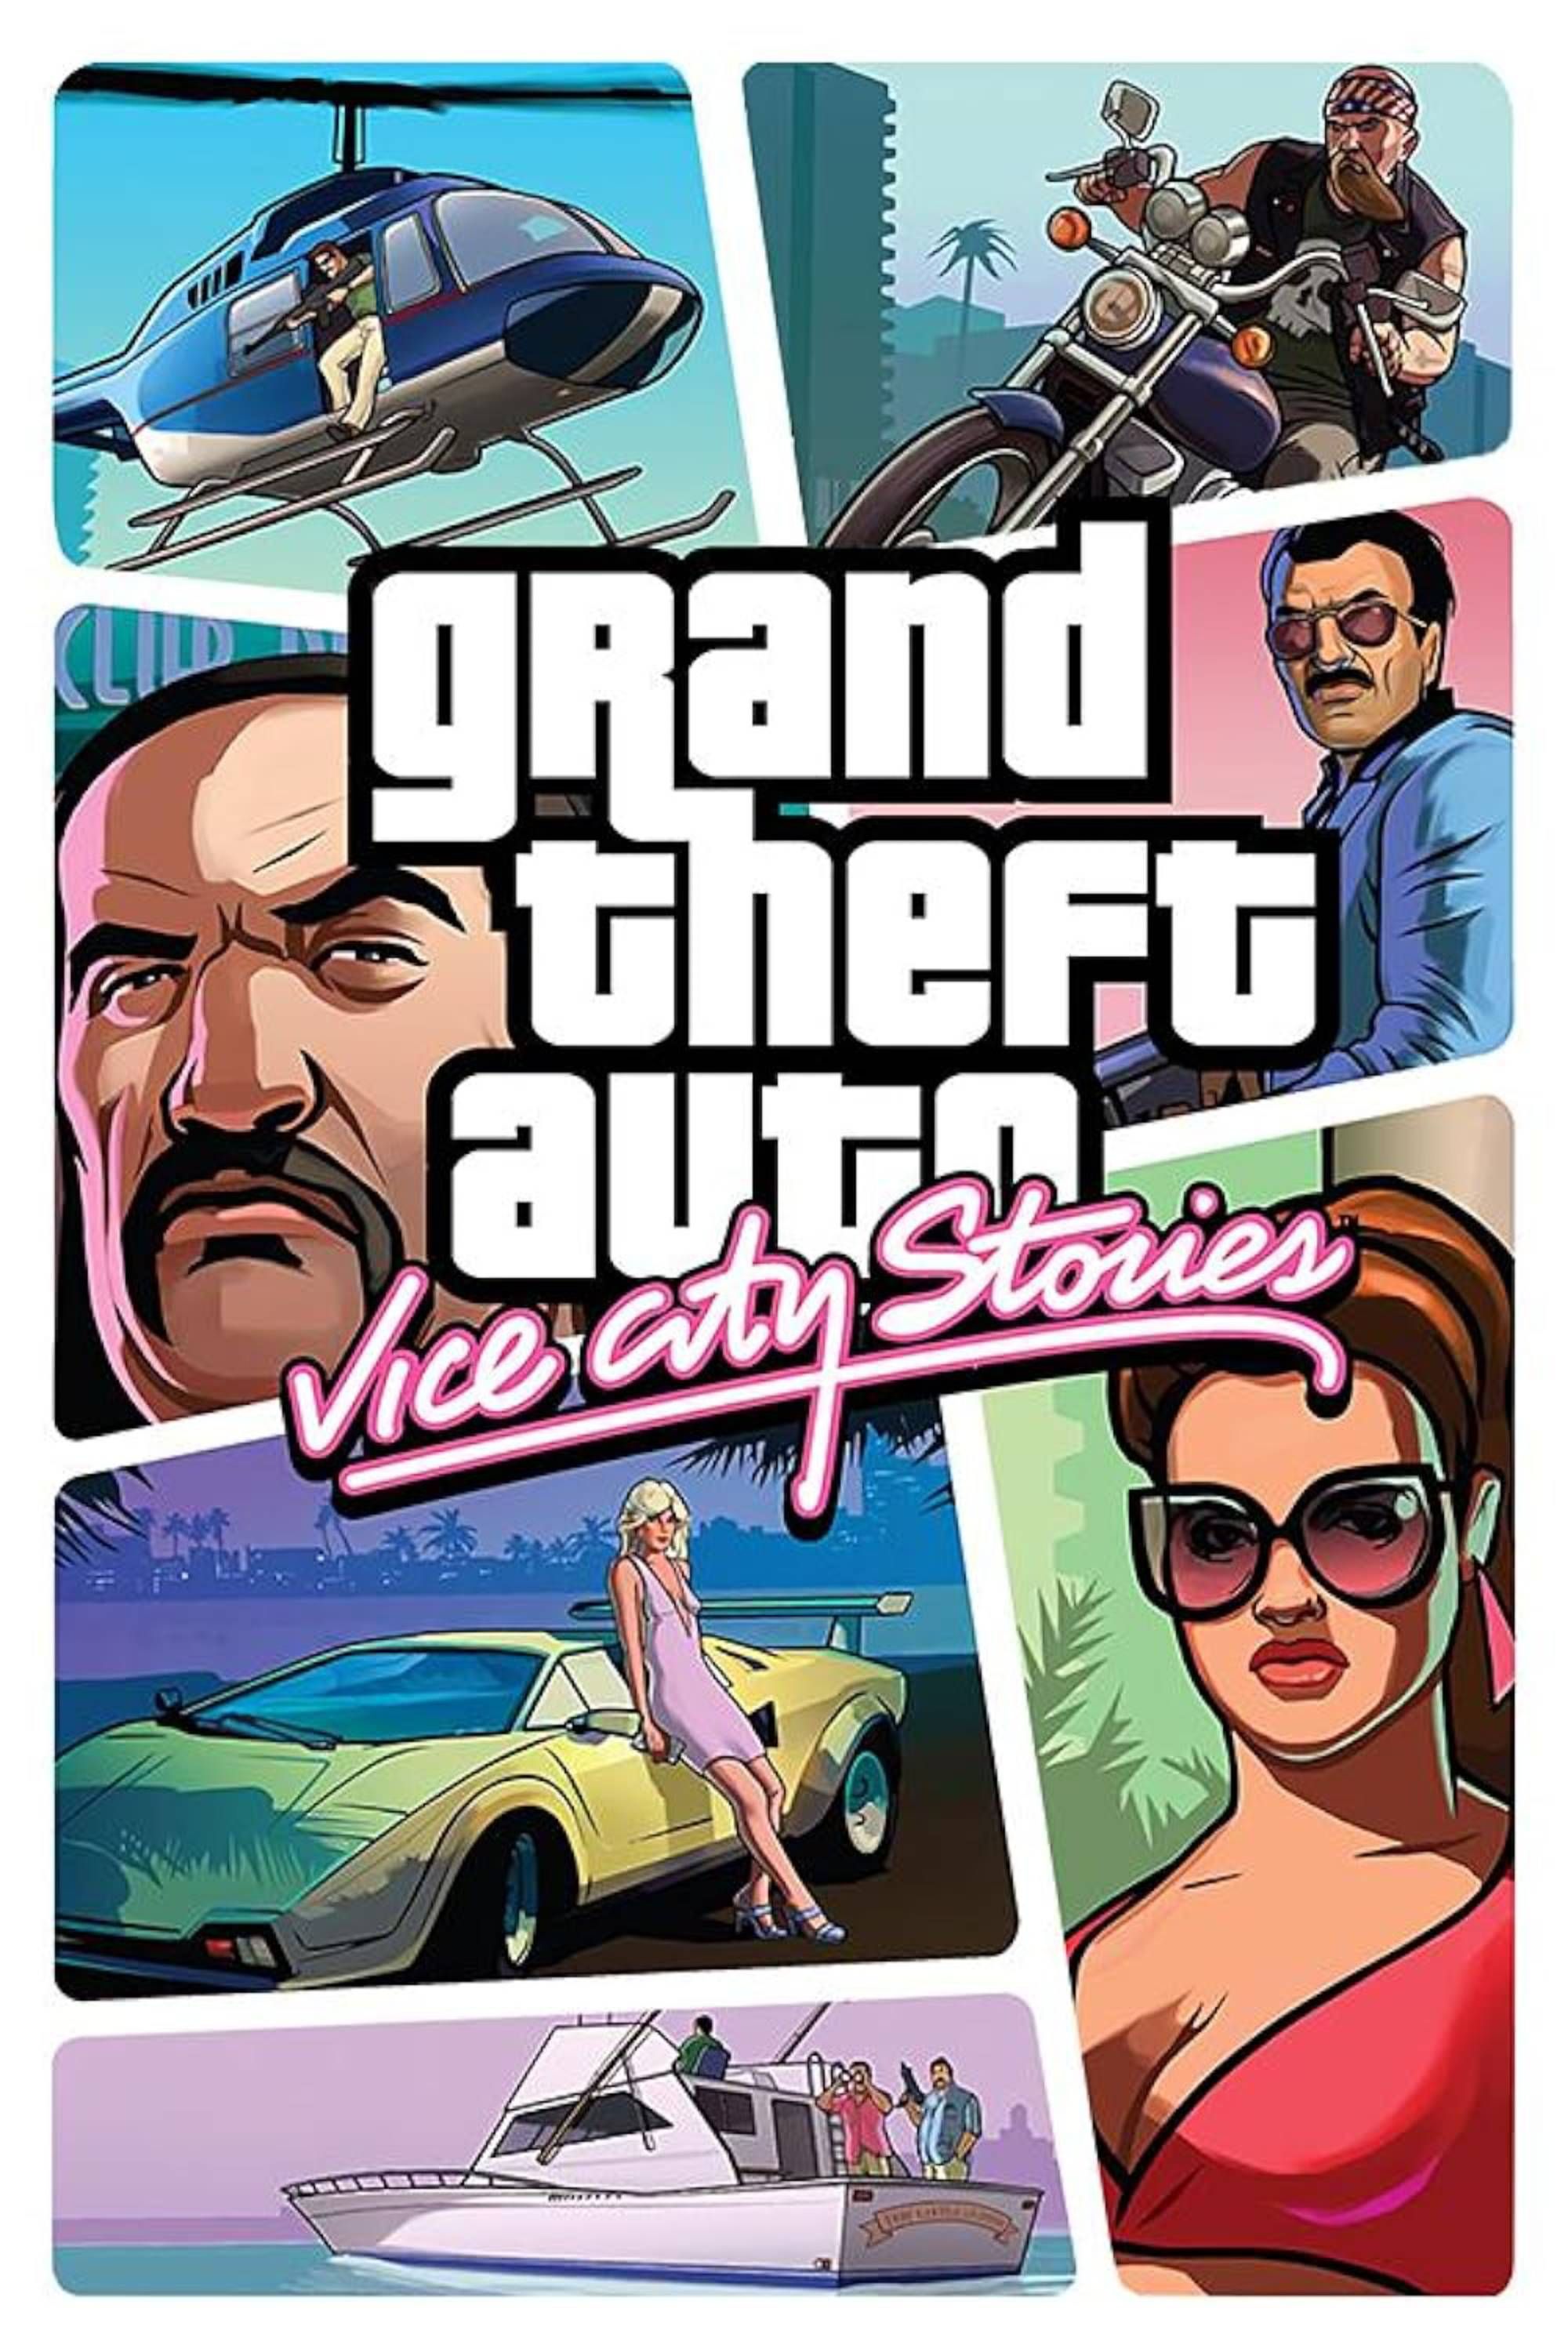 Every Grand Theft Auto Game Set In Vice City